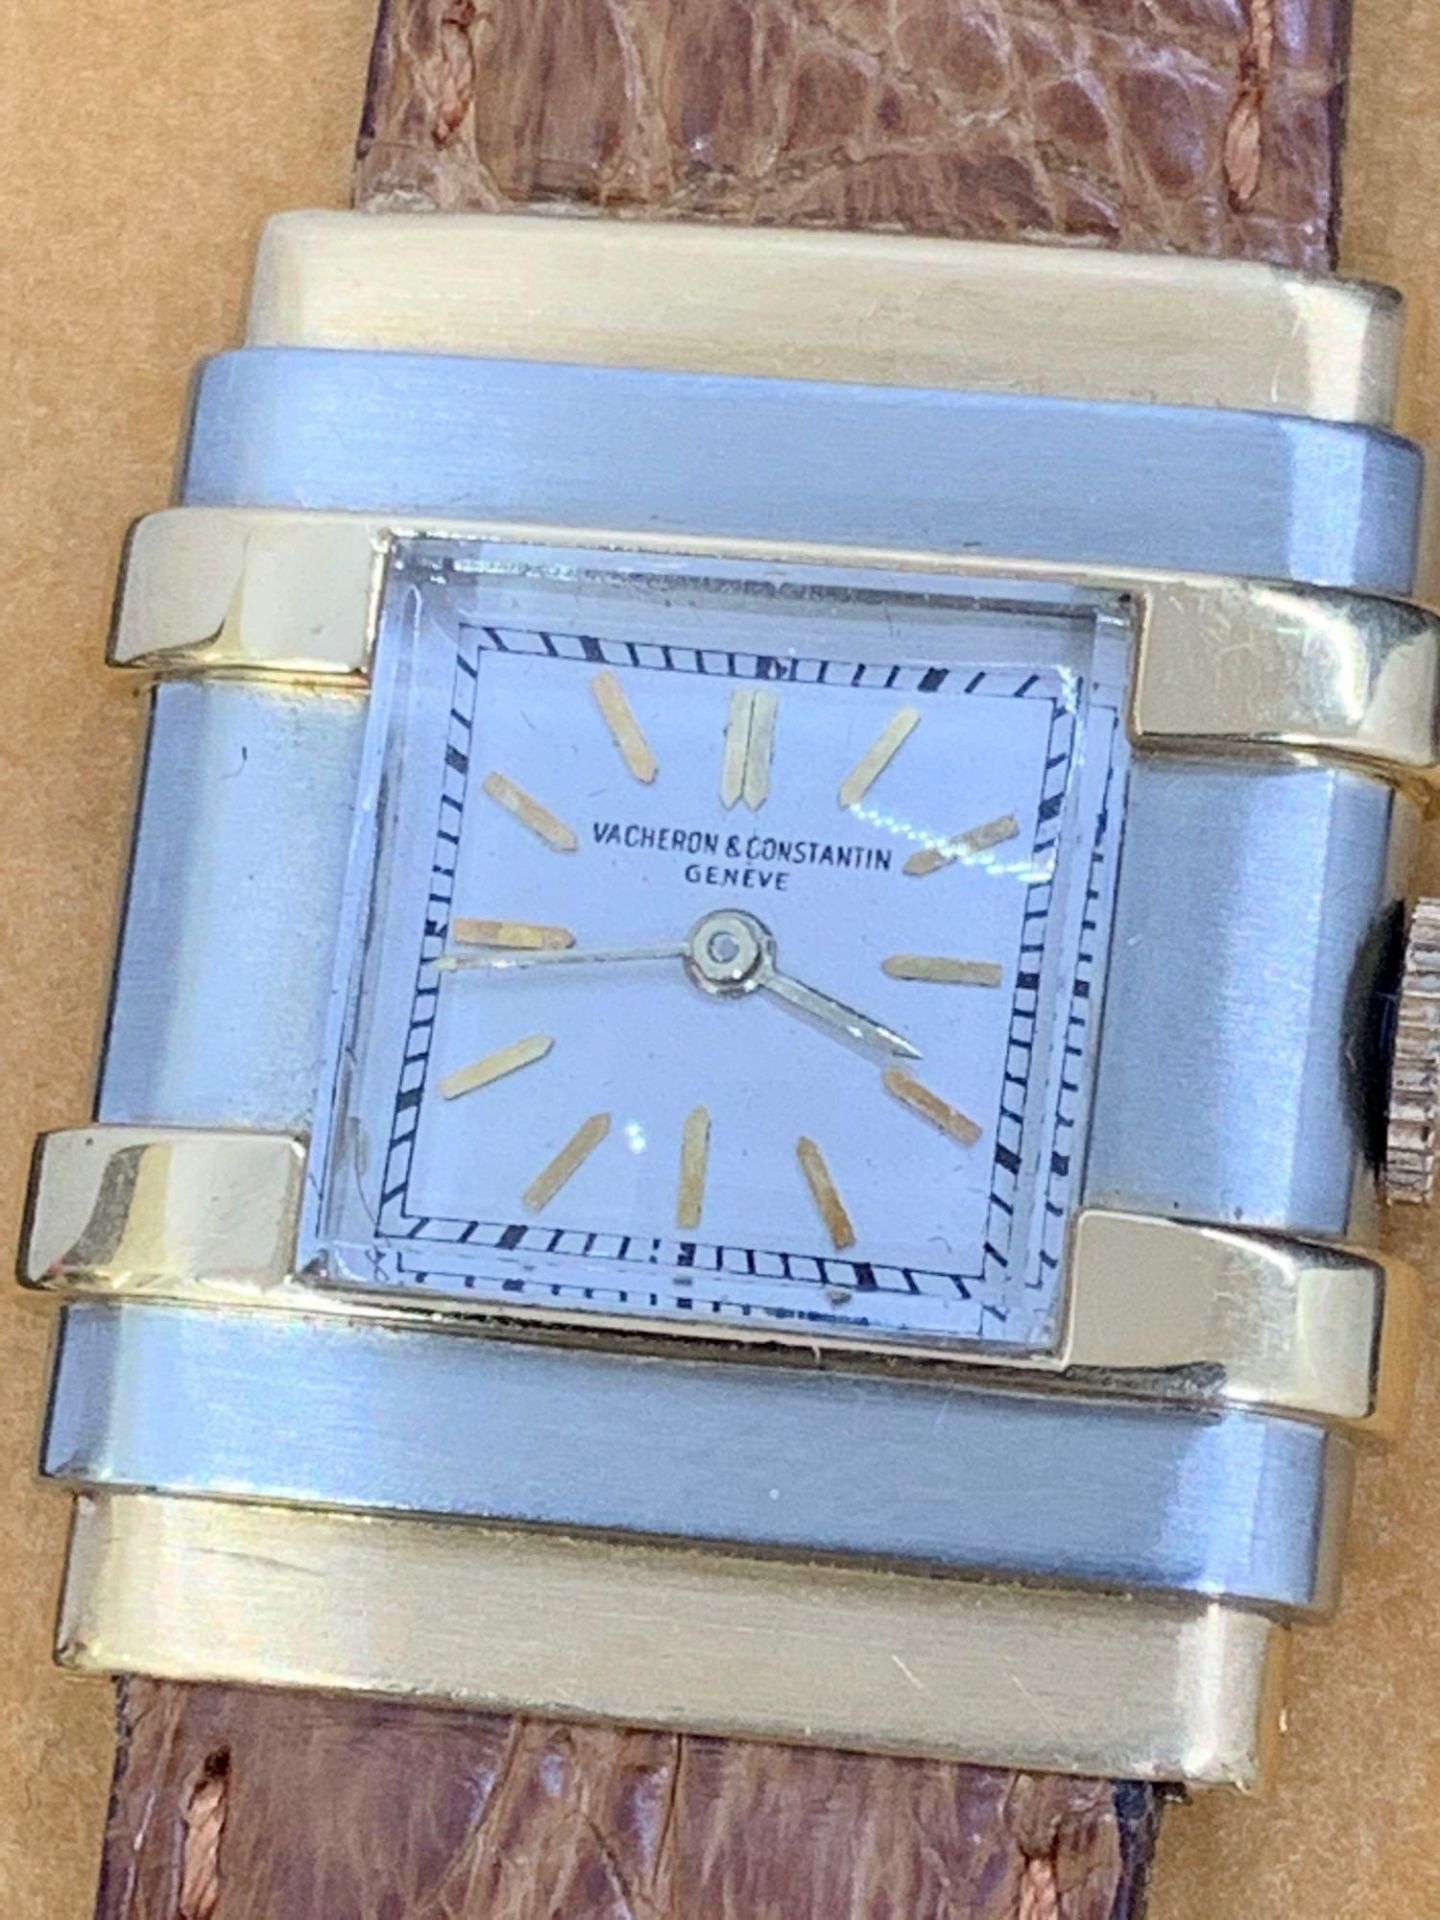 Vacheron & Constantin Gold Coloured Watch Tested as 18ct Gold Movement & Caseback Unsigned - Image 3 of 9